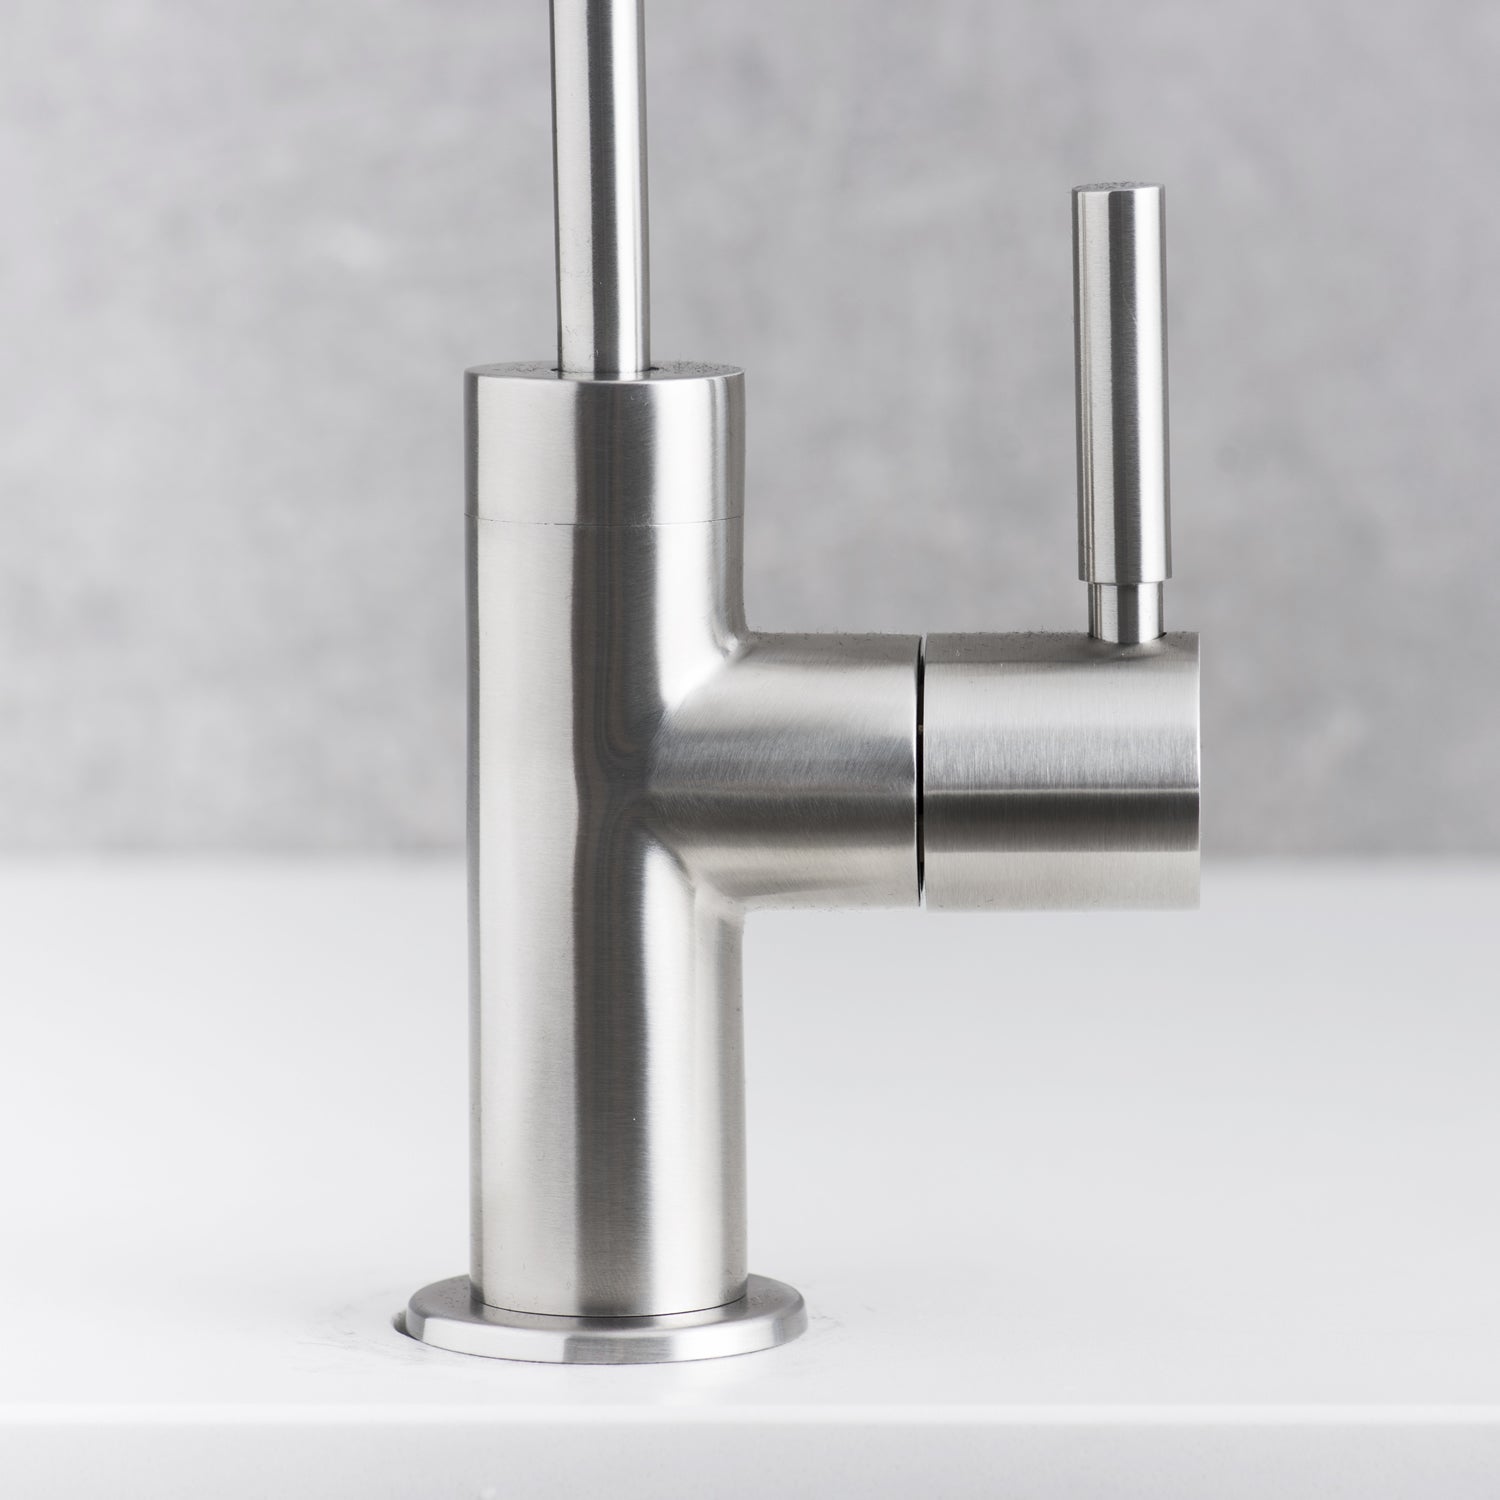 DAX Drinking Water Faucet, Stainless Steel Body, Brushed Finish, Size 8-1/2 x 12-1/4 Inches (DAX-PJ-01)